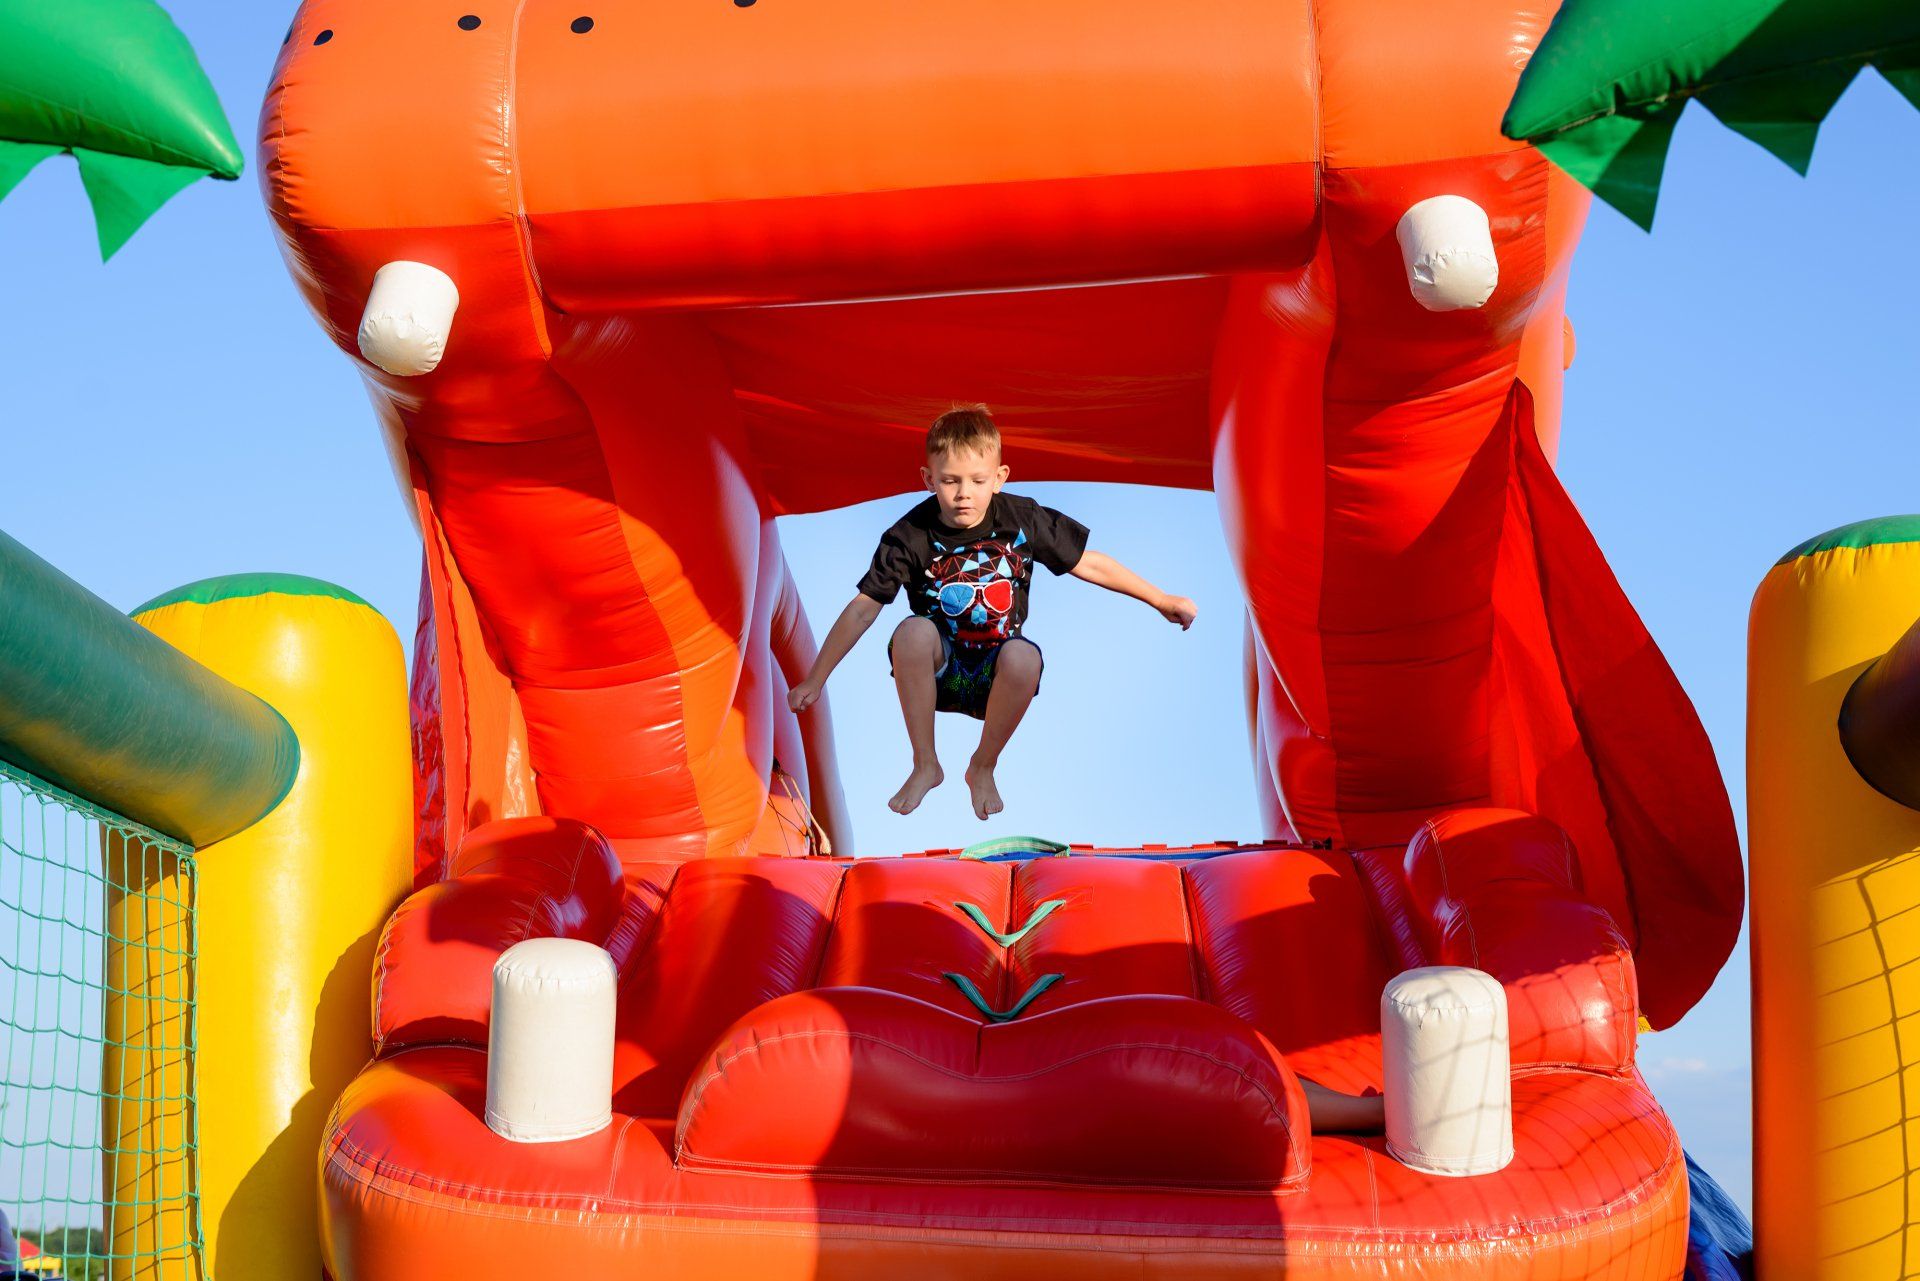 Small boy (6-8 years) wearing t-shirt and shorts jumping bare foot in the air on a colorful bouncy castle